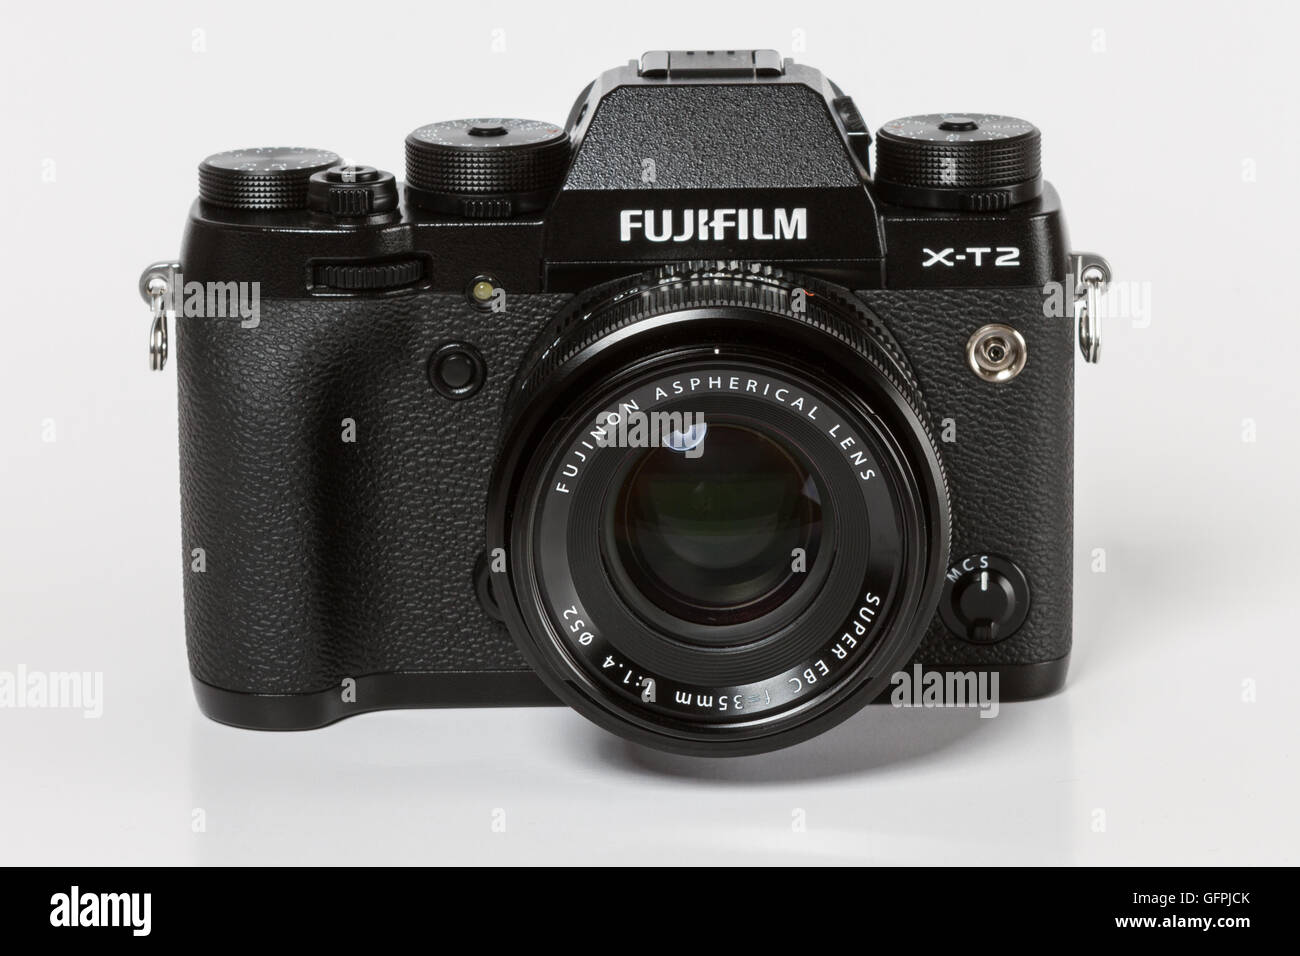 FUJIFILM X-T2, 24 megapixels, 4K video mirrorless camera from front  on white background Stock Photo